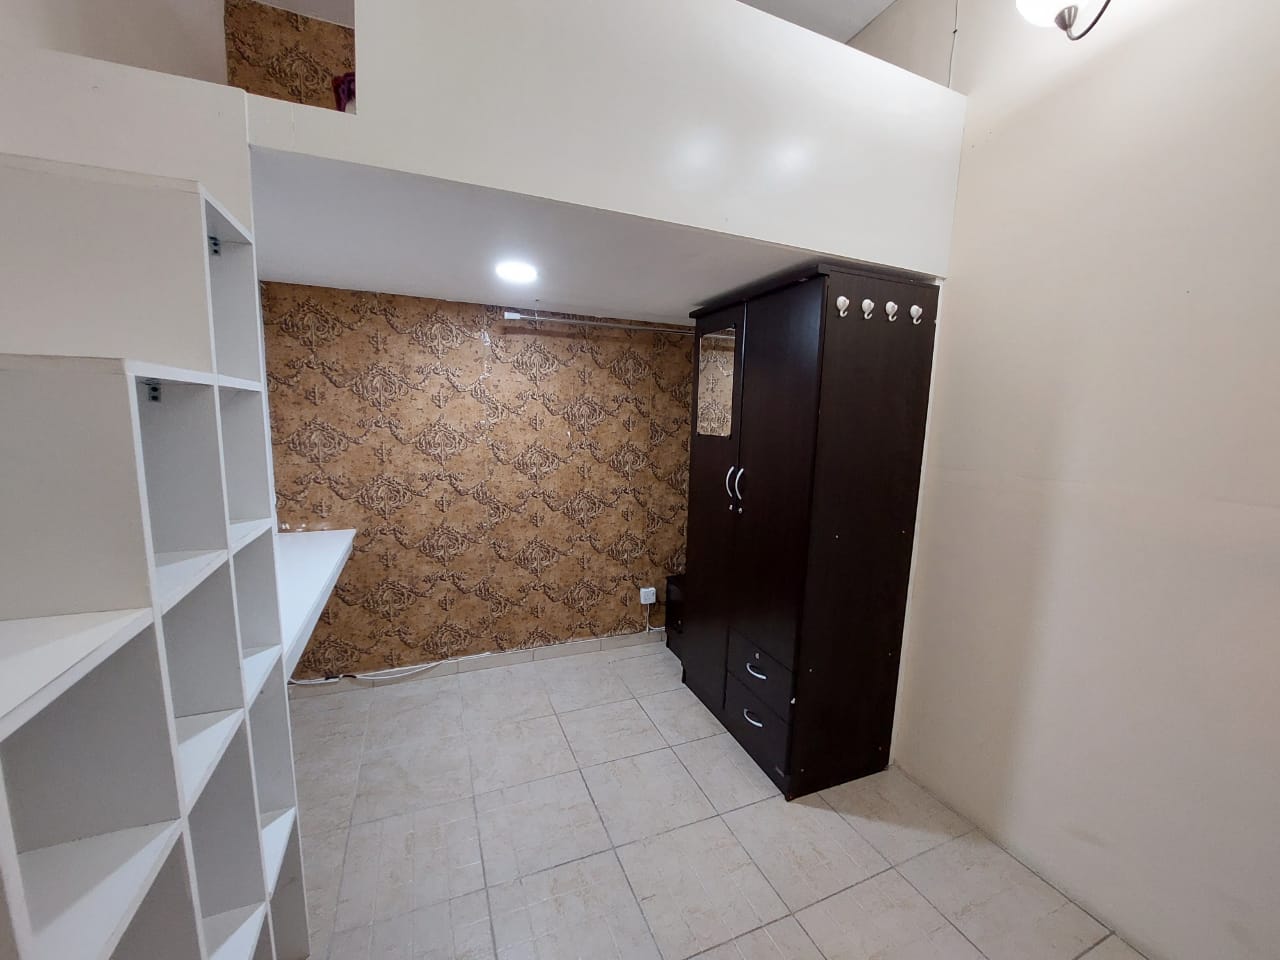 Loft Type Closed Partition Room With Sharing Bathroom